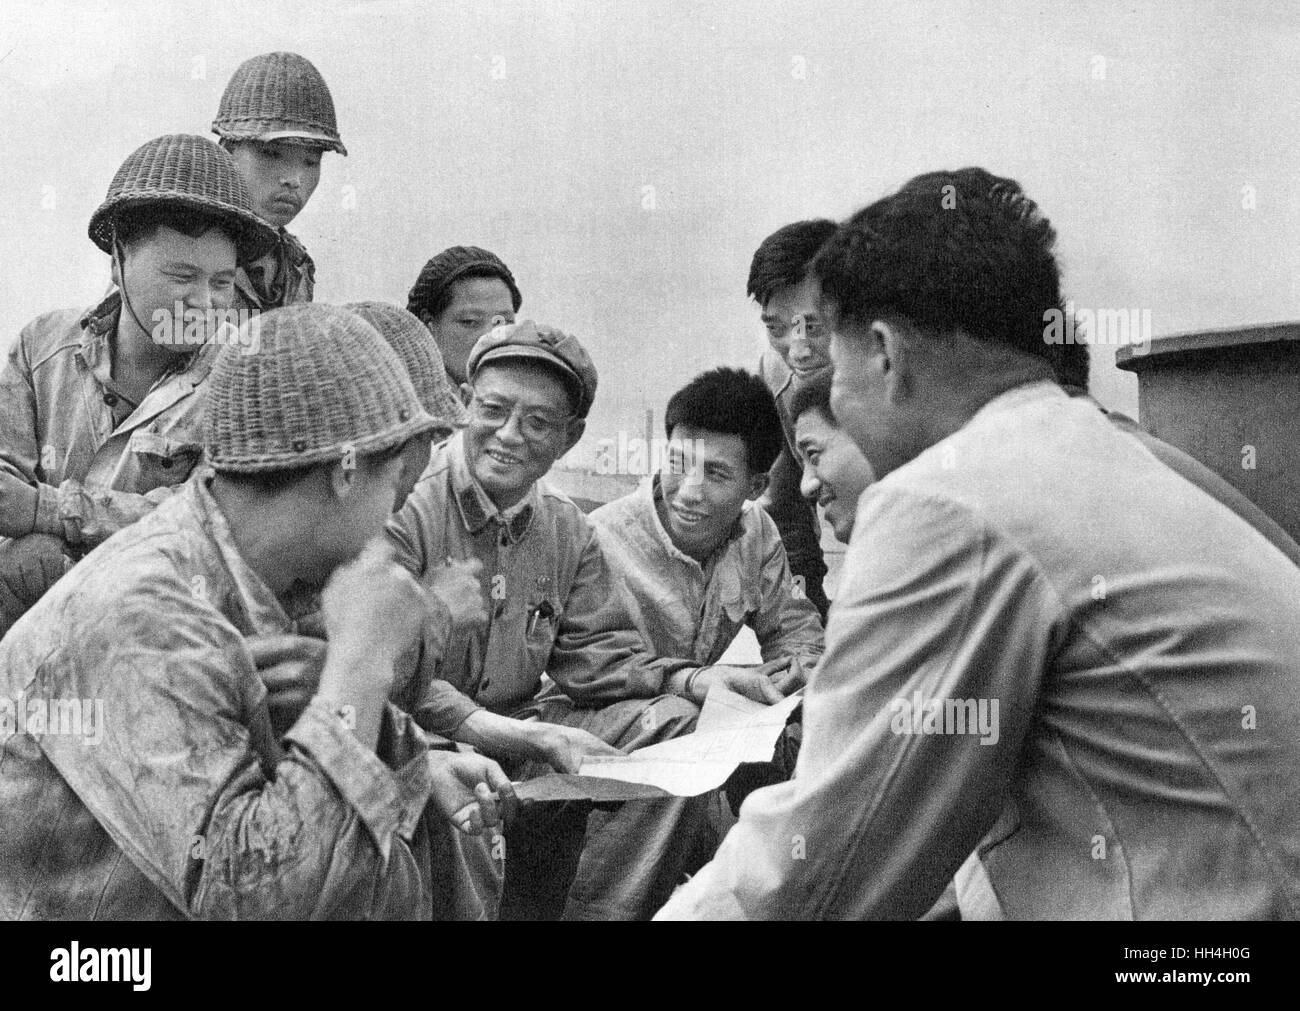 Communist China - shipbuilding yard workers and technicians with plan, working together to raise standards during the Cultural Revolution era. Stock Photo